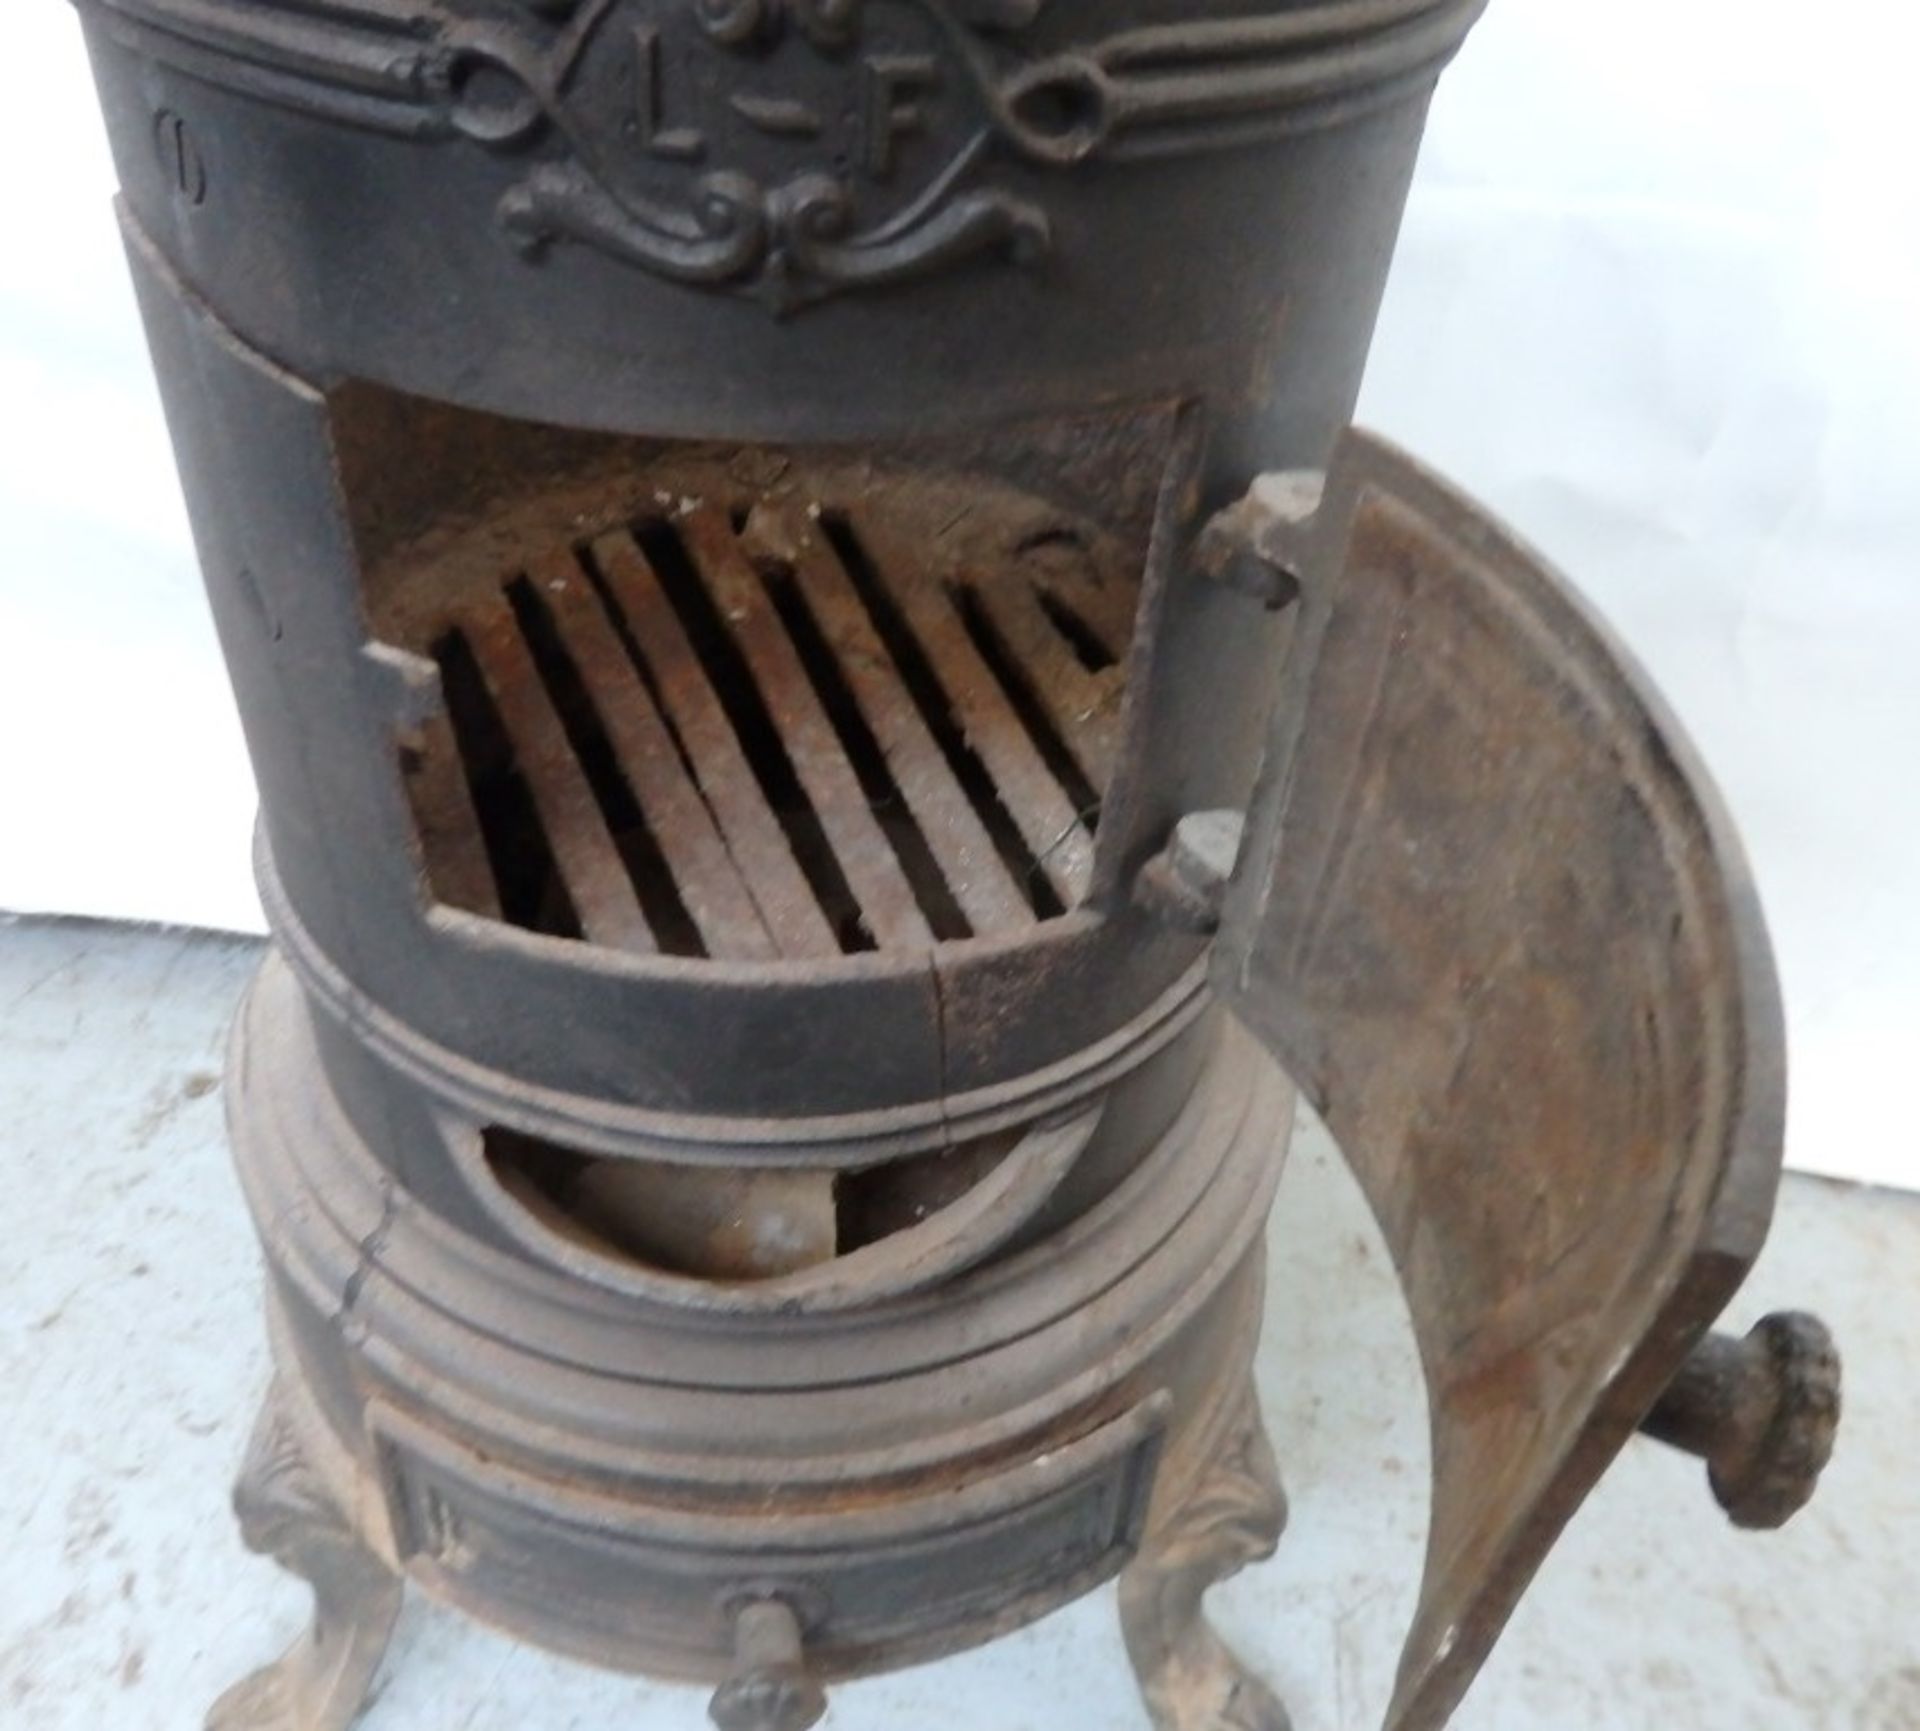 1 x Reclaimed Antique Cast Iron Potbelly Wood Burner / Stove - Dimensions: H61, Diameter 30cm - - Image 3 of 9